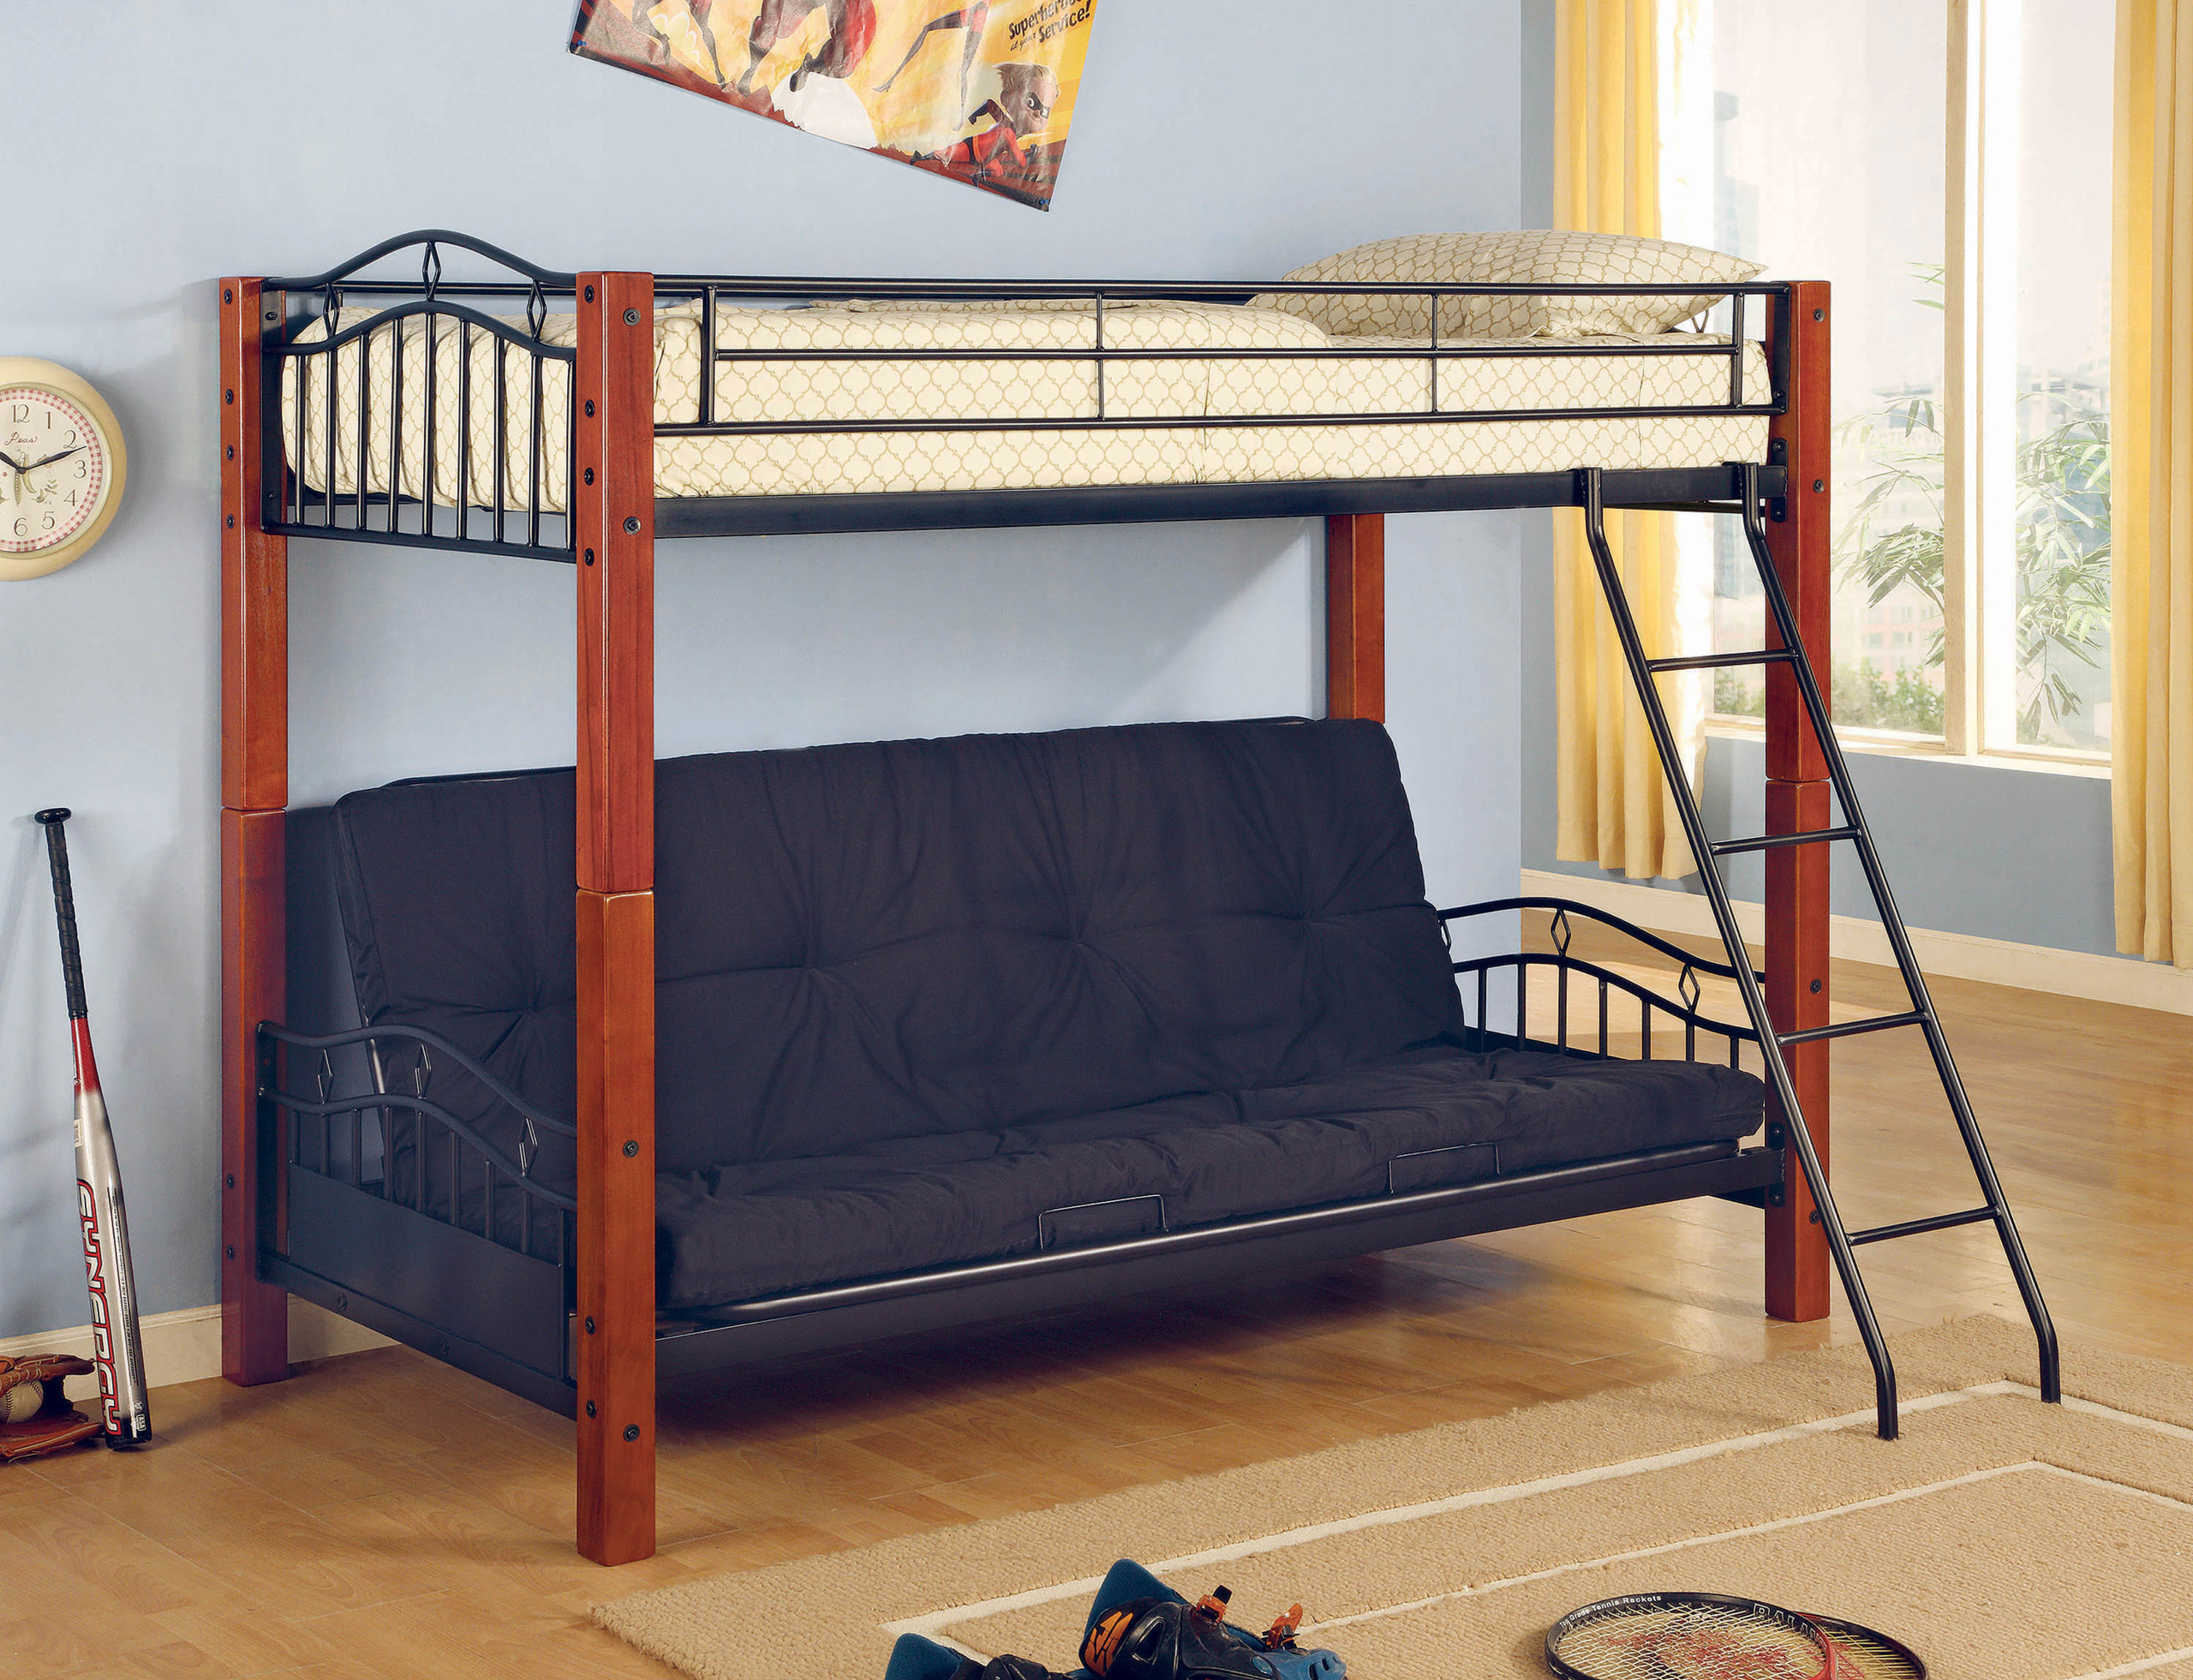 Full Loft Bed Over Futon Limited Time, Twin Over Full Futon Bunk Bed With Stairs